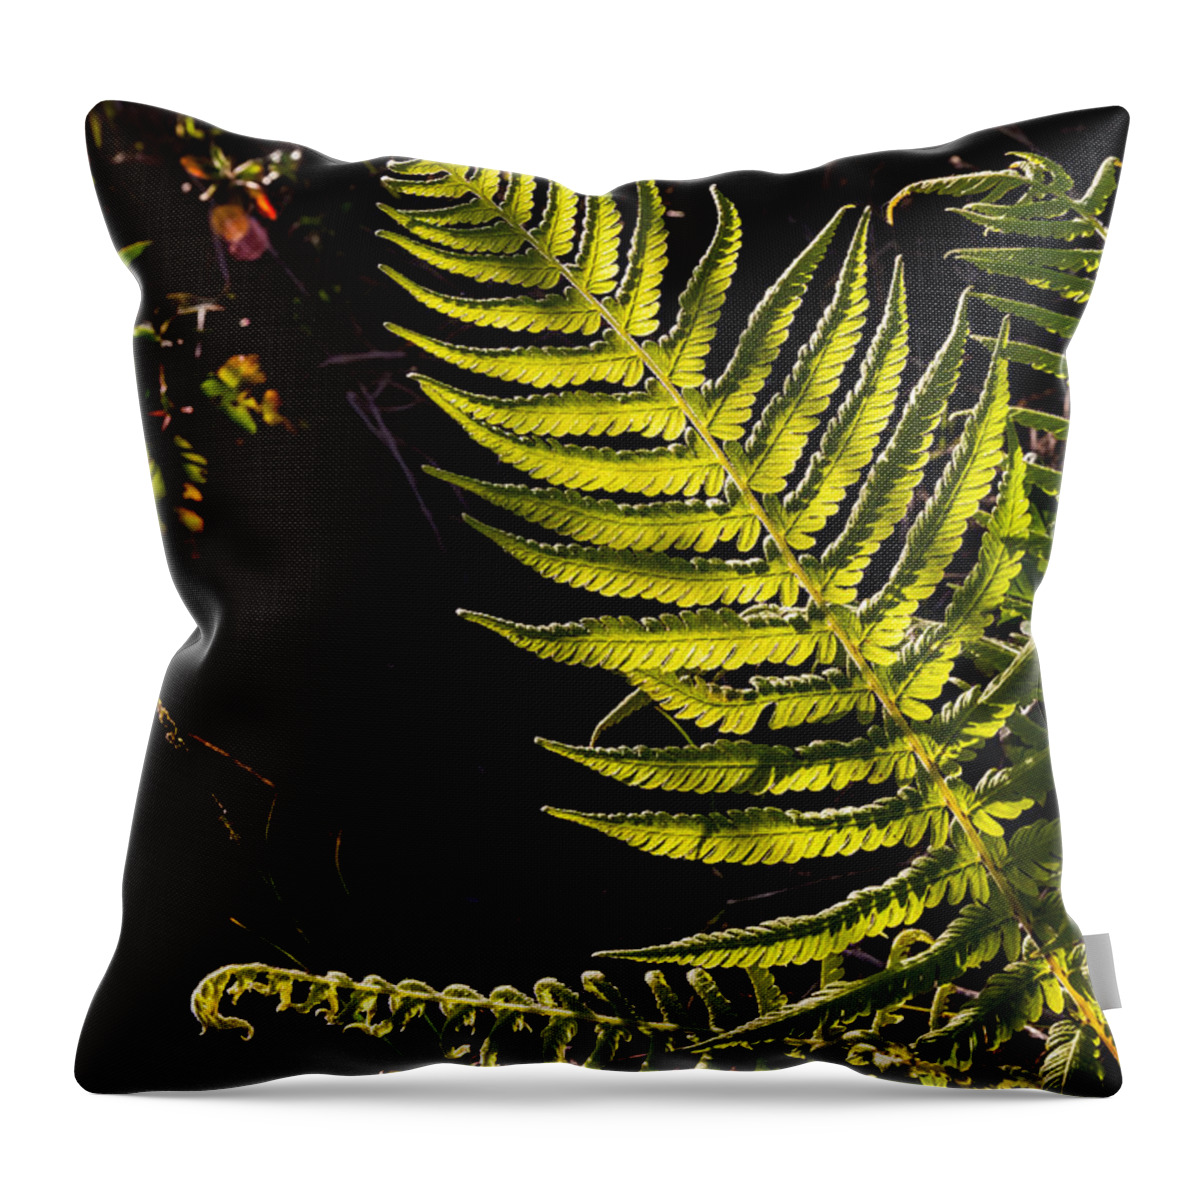 Beautiful Throw Pillow featuring the photograph Sunlit Fern by Ed Gleichman